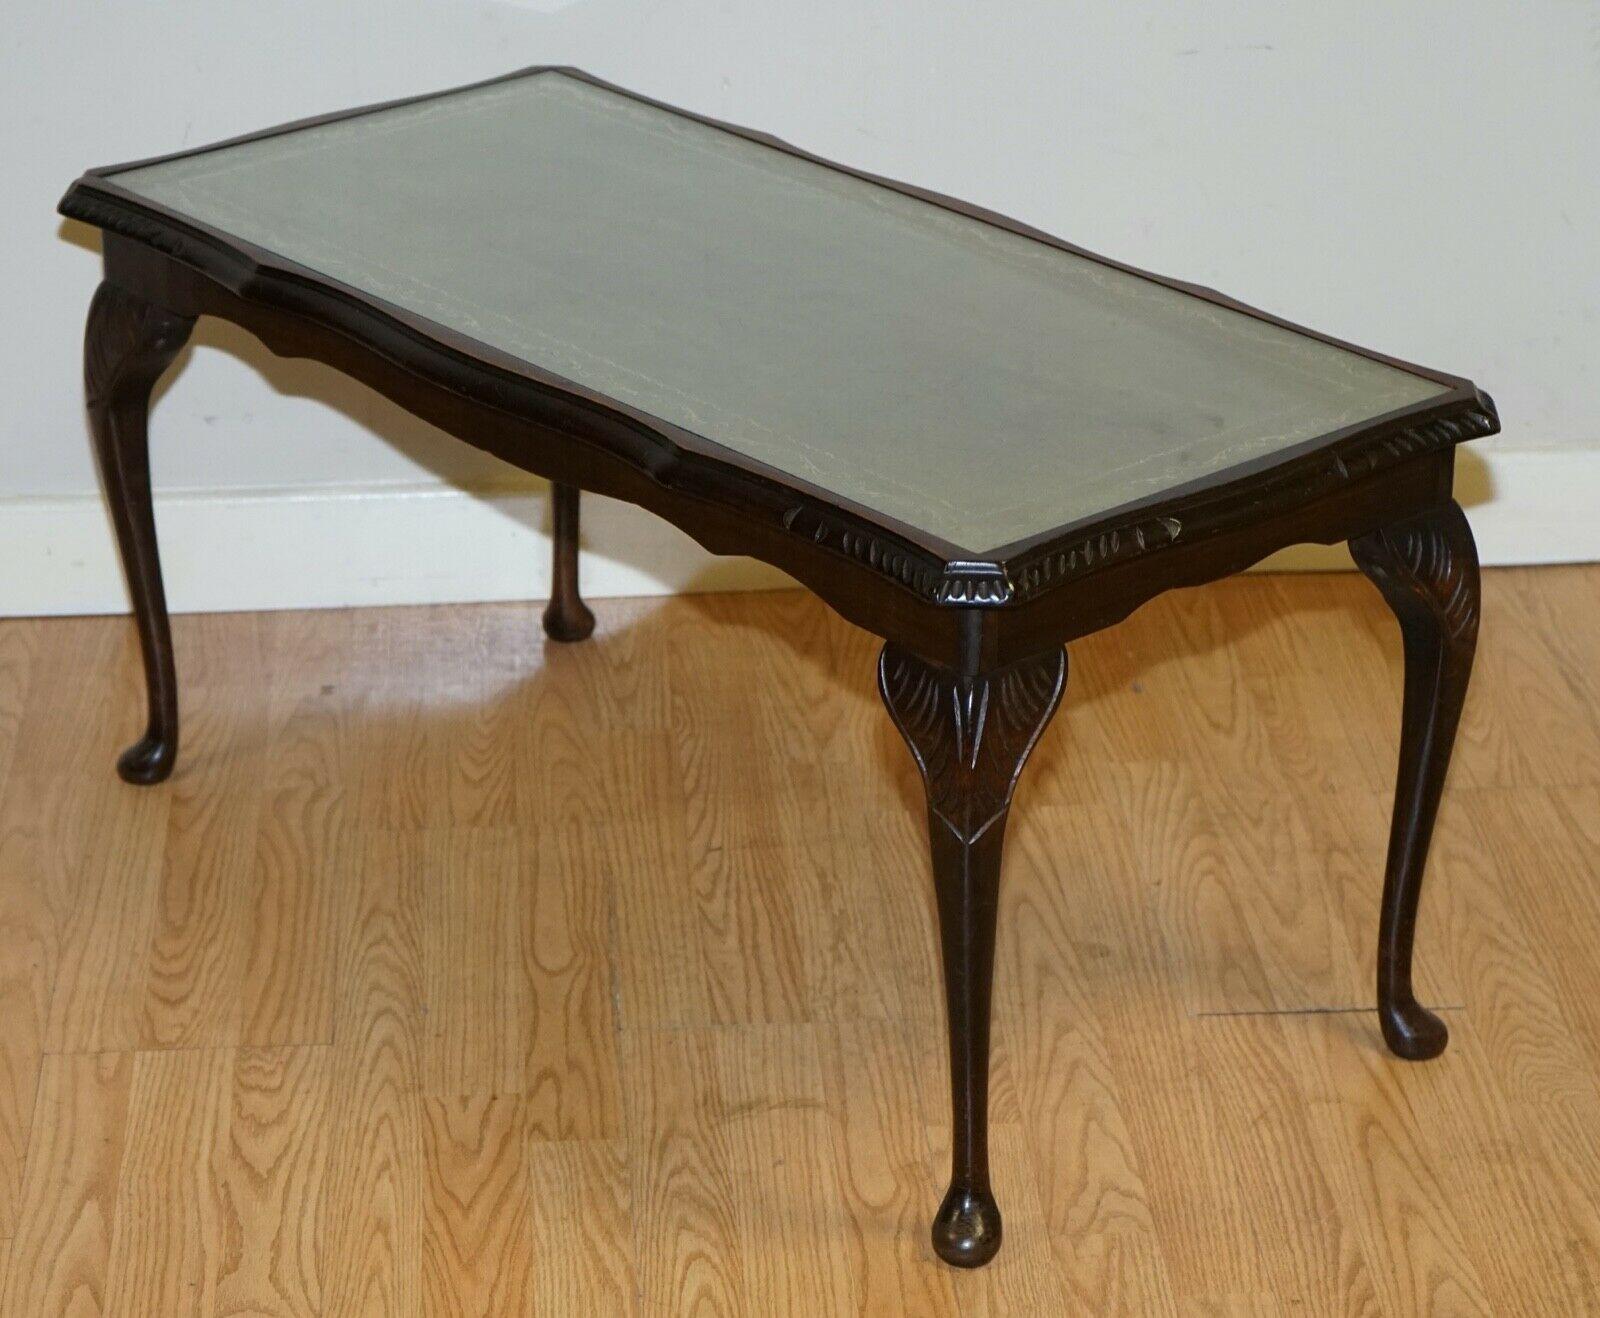 leather top coffee table vintage